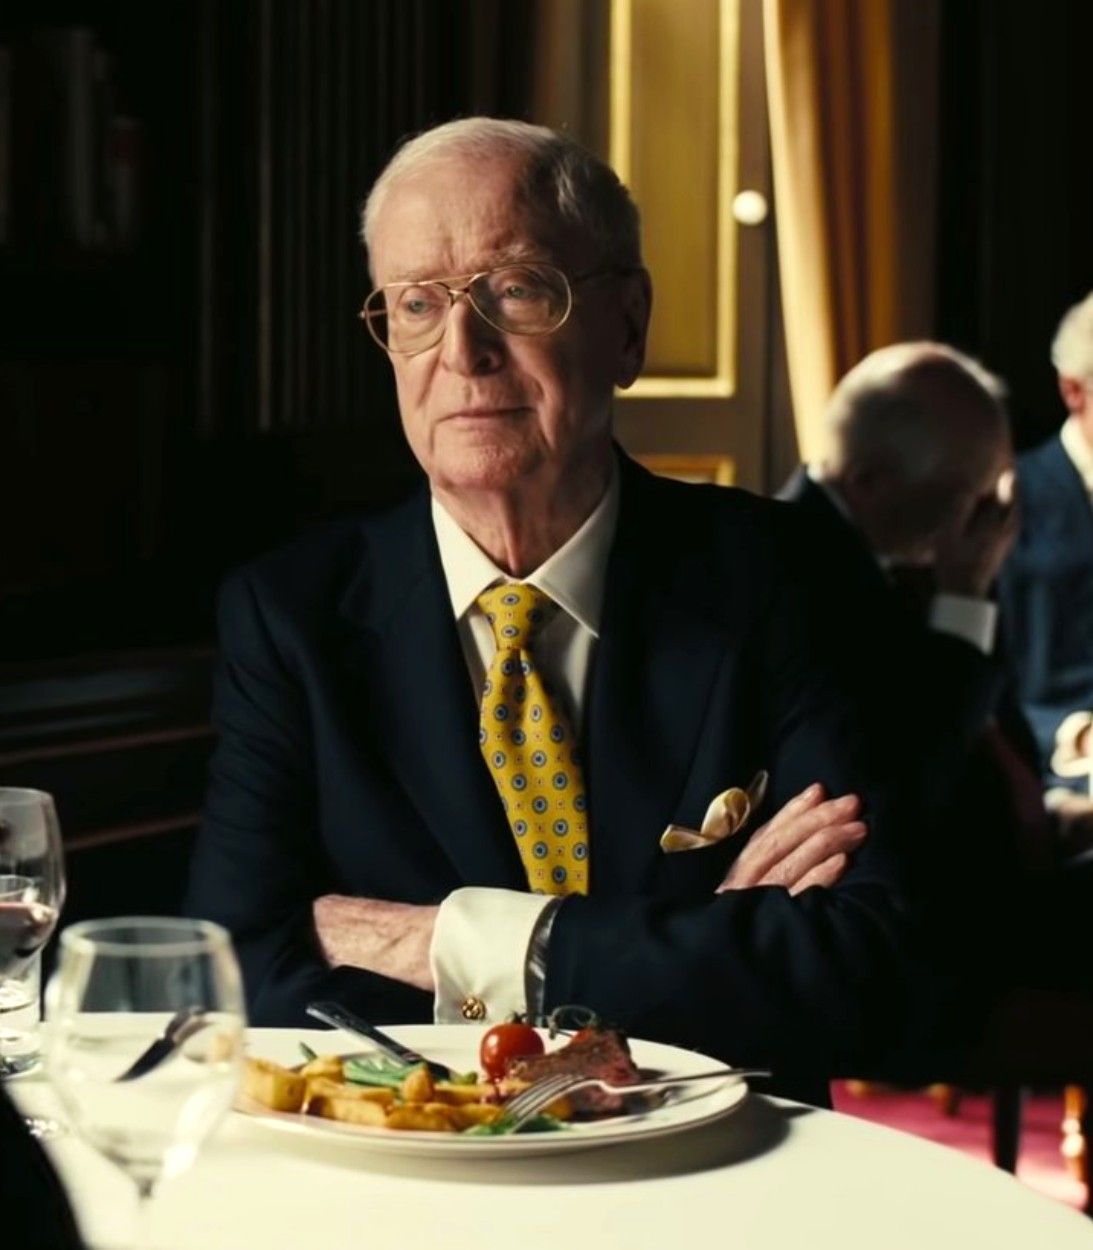 Sir Michael Caine’s Tenet Character Name… Is Sir Michael